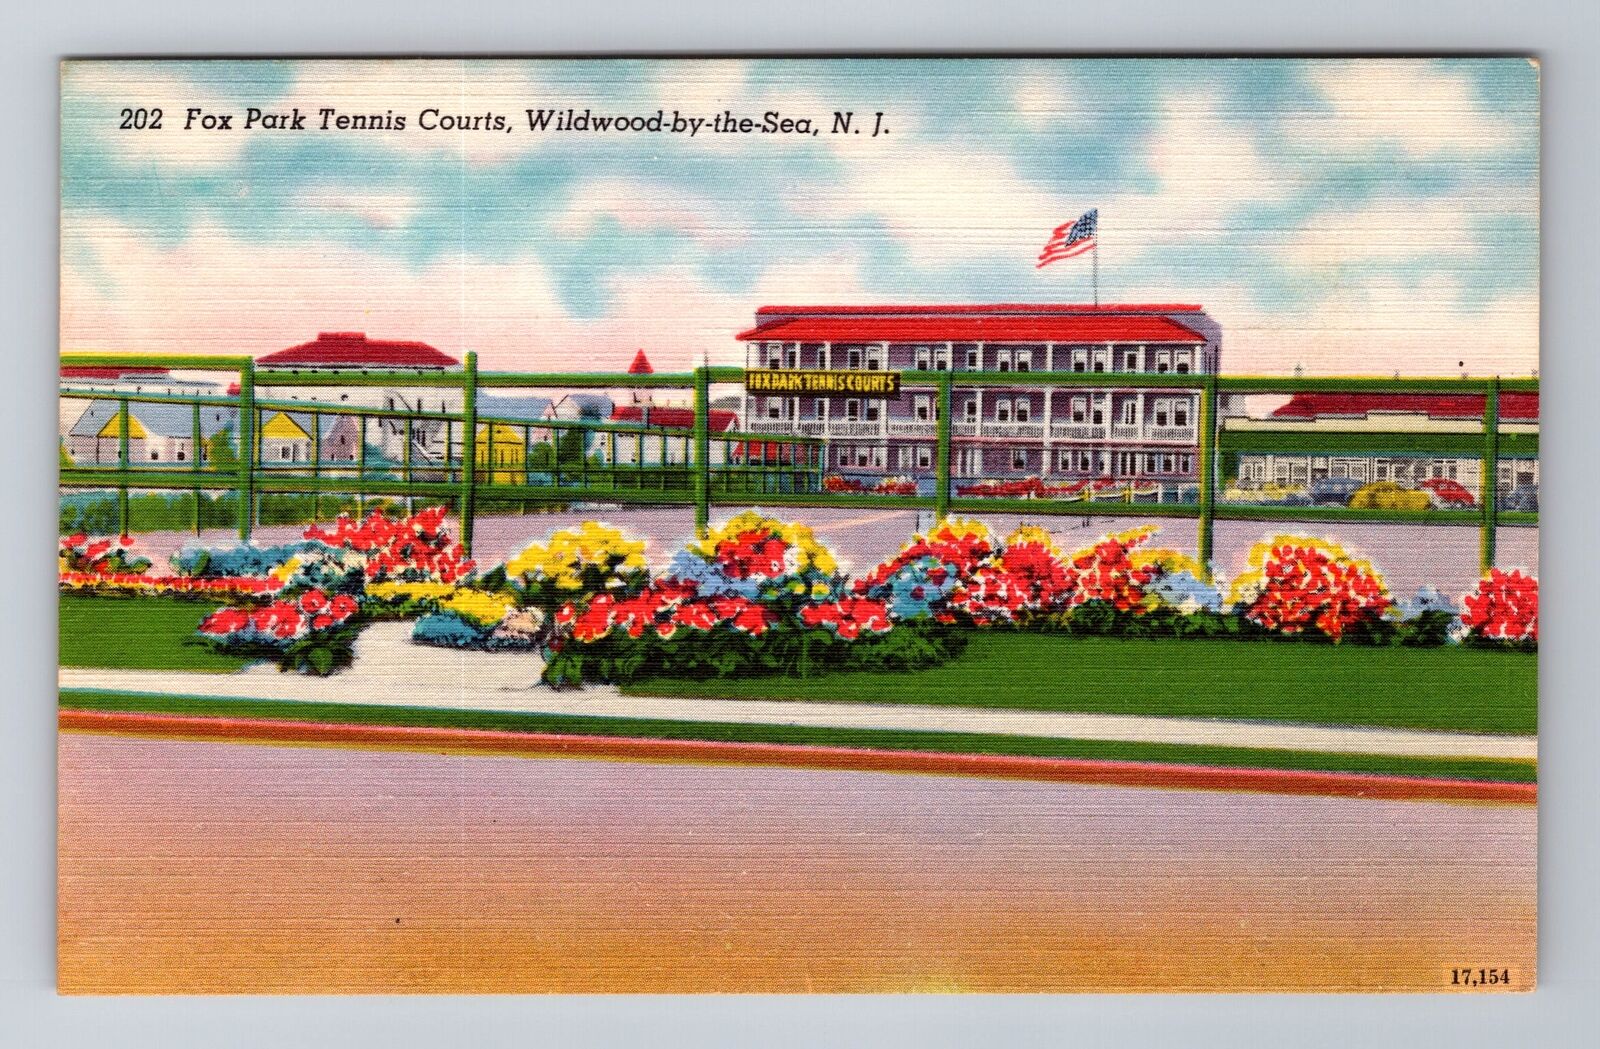 Wildwood-by-the-Sea NJ-New Jersey, Fox Park Tennis Courts, Vintage Postcard